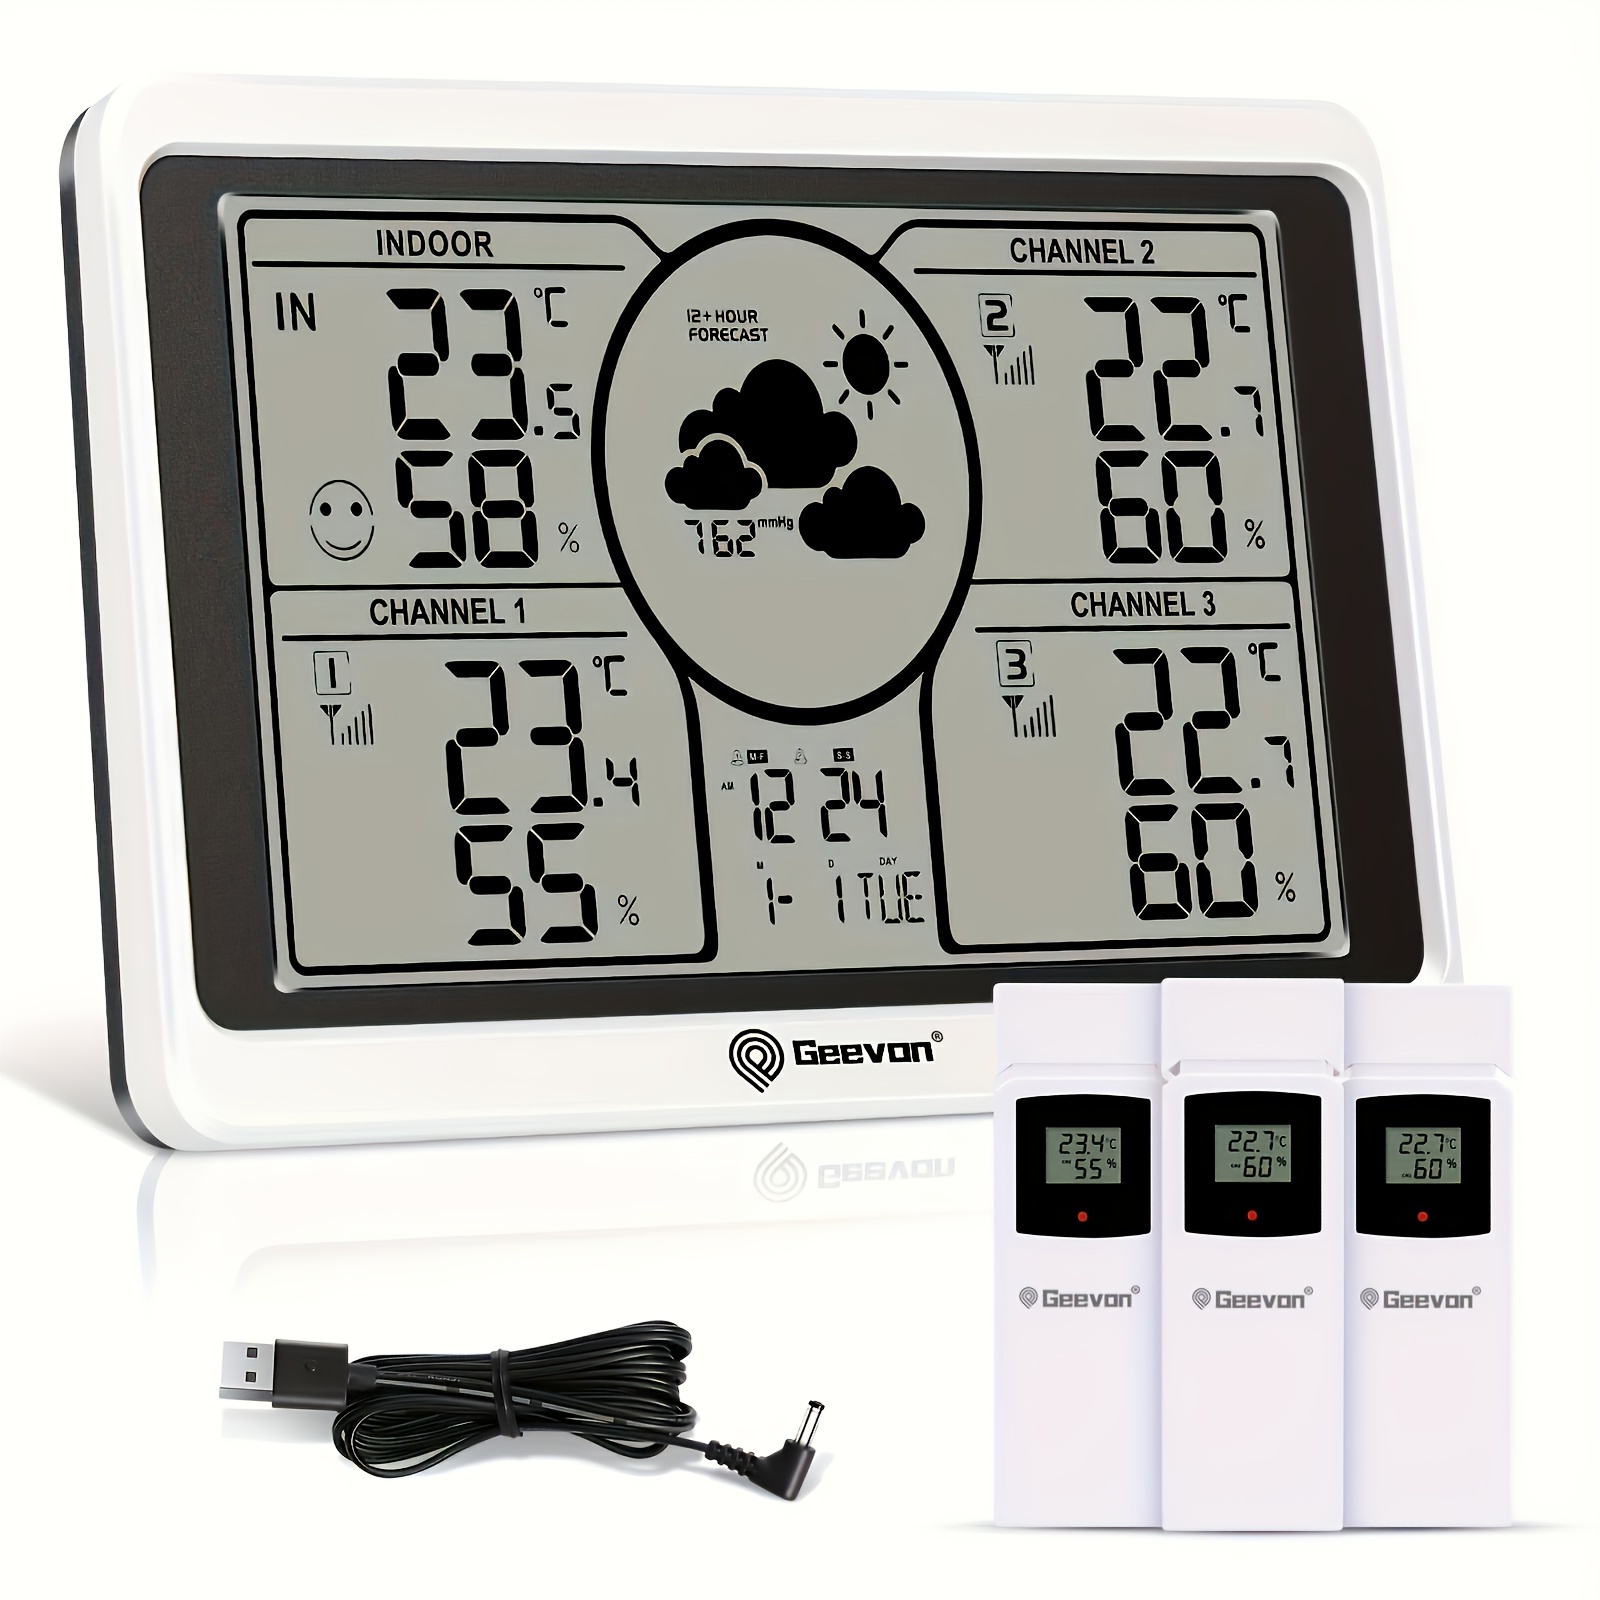 1pc Geevon Weather Stations Wireless Indoor Outdoor Thermometer Multiple  Sensors, Digital Weather Thermometer With Large LCD Display, Adjustable  Backl